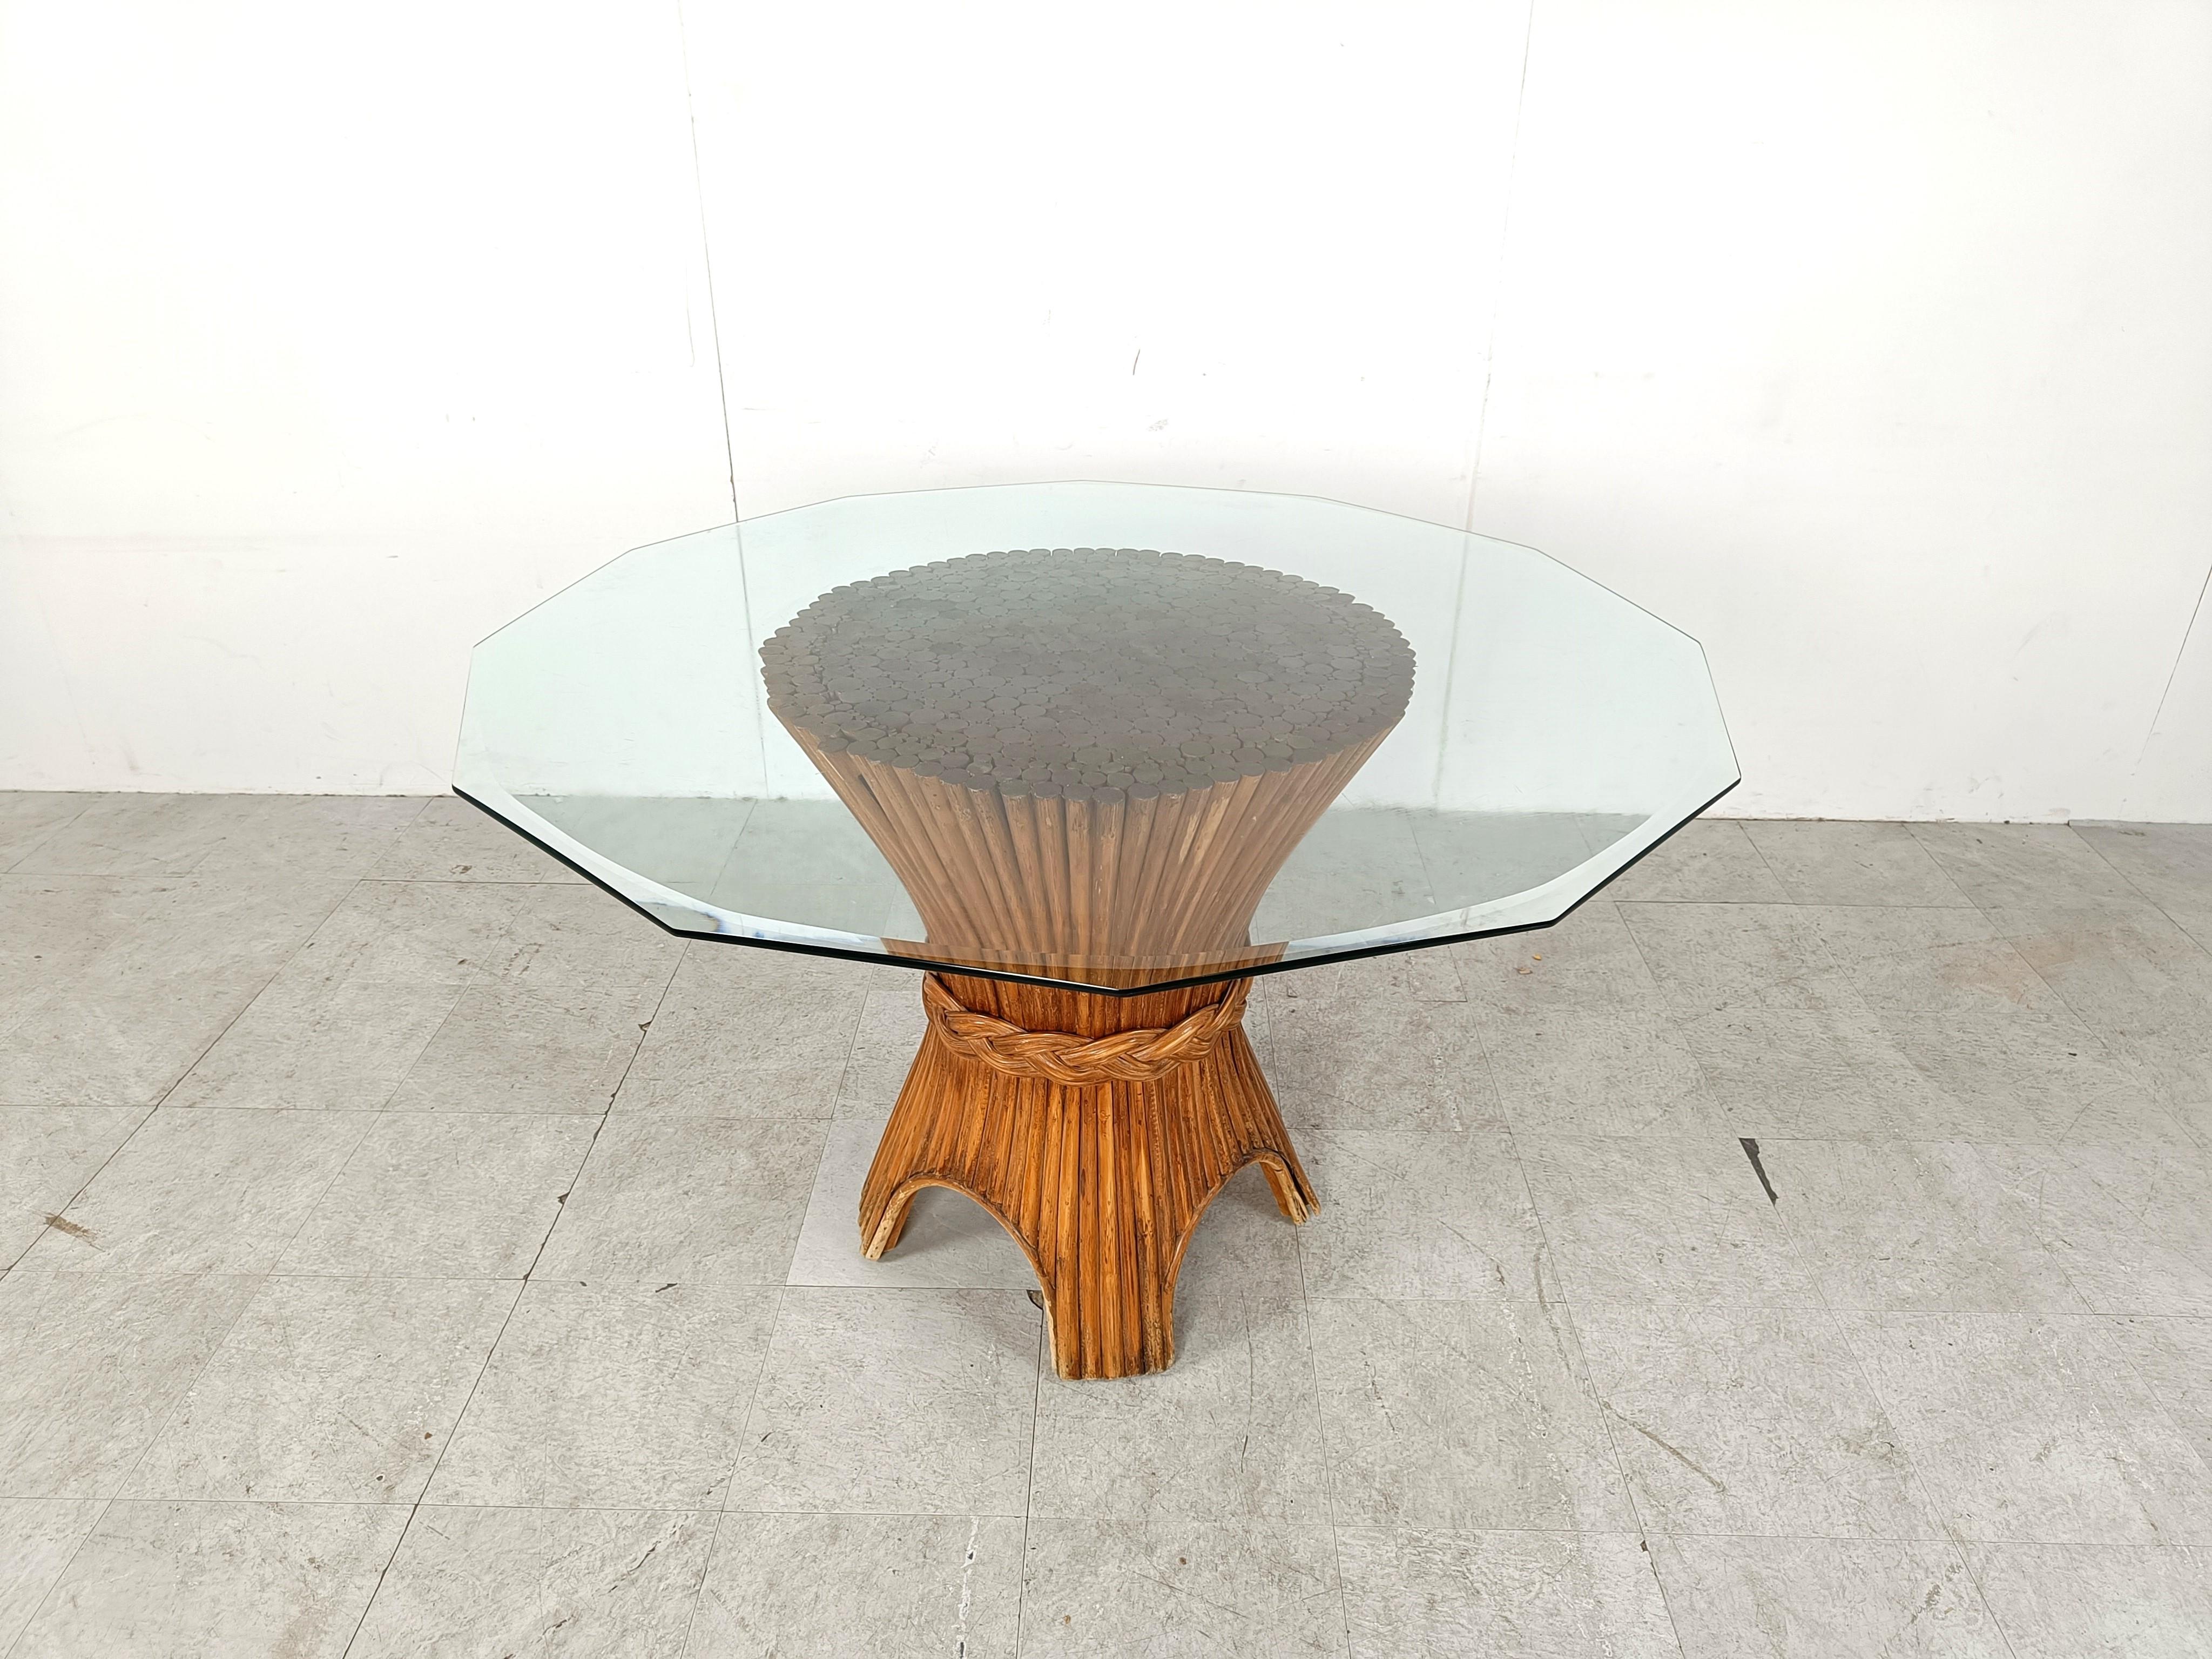 Vintage bamboo dining table with an octogonal beveled glass top. 

Beautifully shaped base.

1970s - France

Good condition

Dimensions:

Height: 75cm/29.52